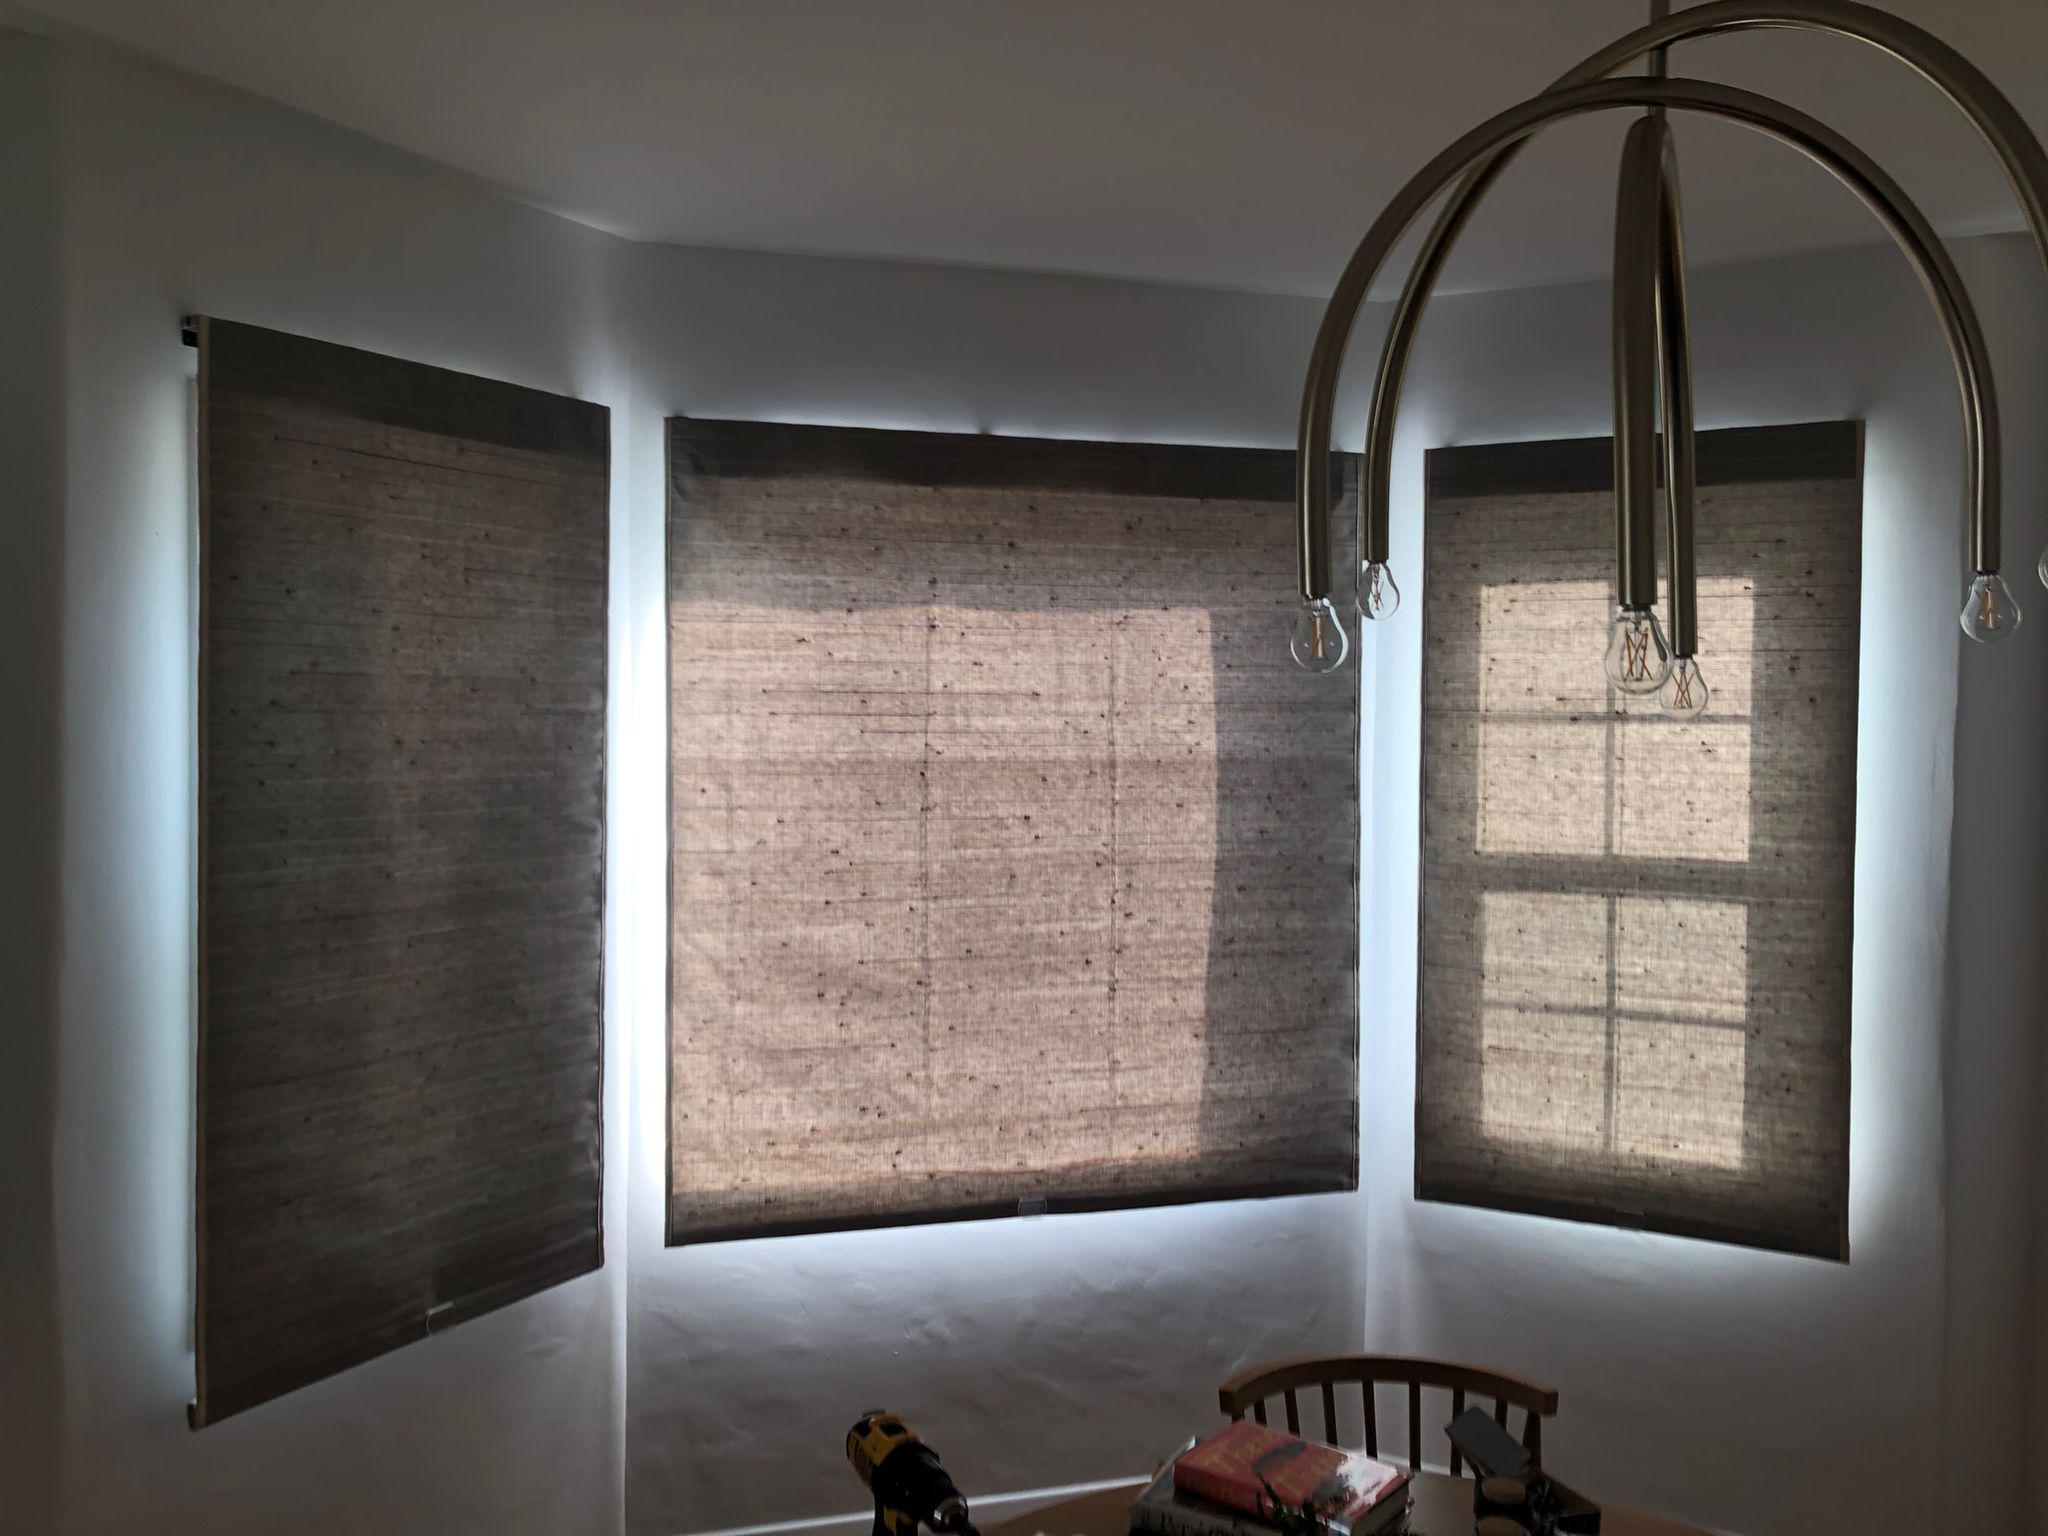 Bamboo shades are extremely versatile when mixing and matching different styles and textures of bamboo shades to your windows. Add a lining for a uniform look from the outside. Bamboo window shades are available in top-down/bottom-up options and can be motorized for added safety and convenience.